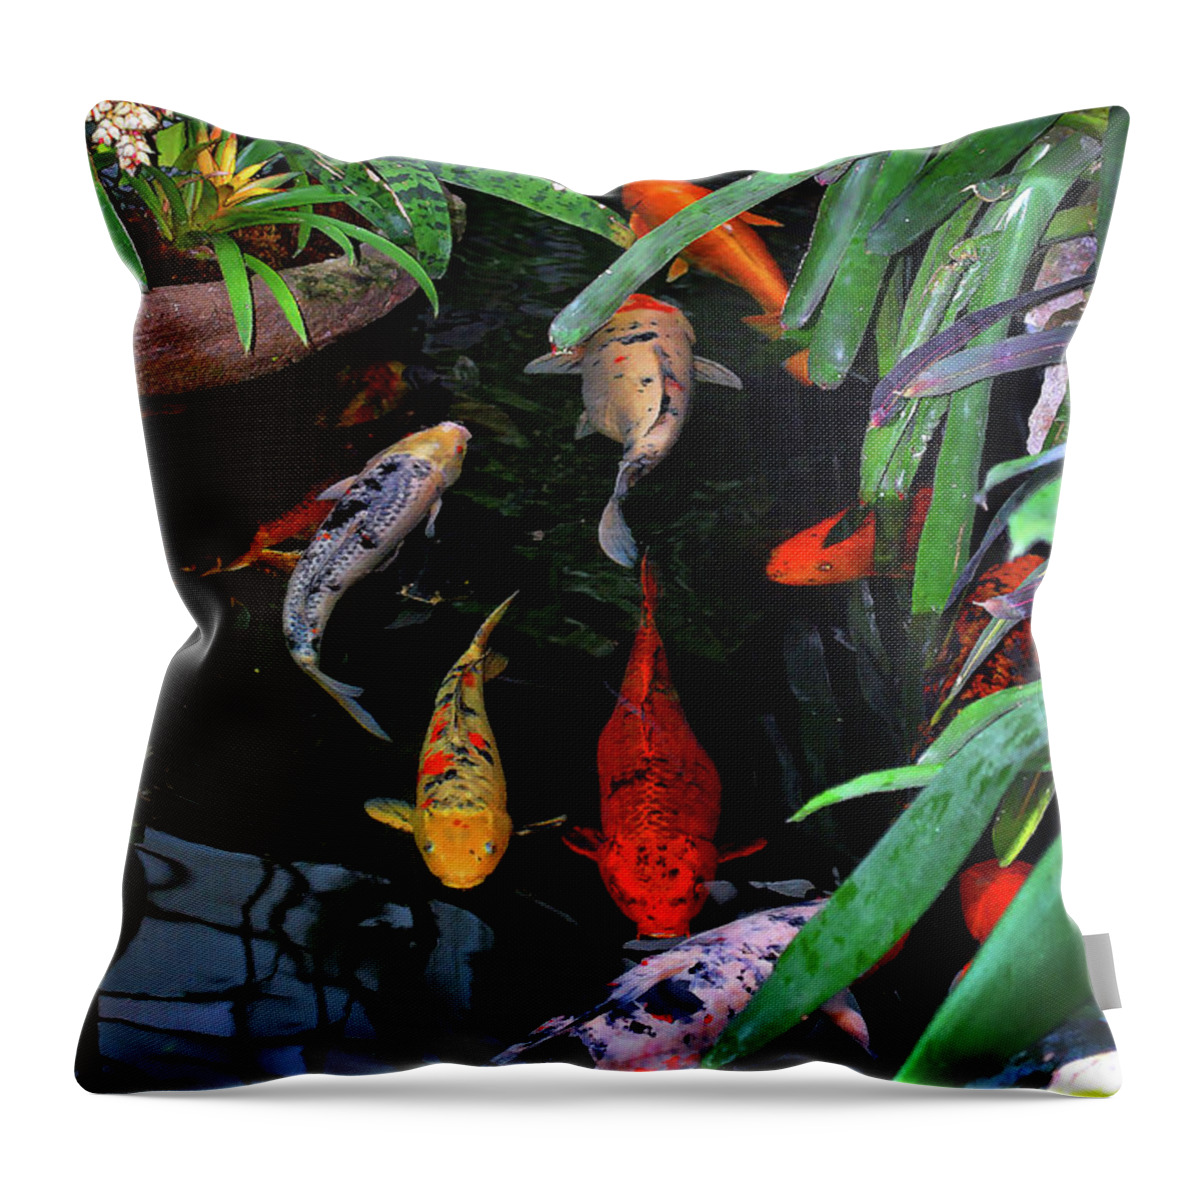 Koi Throw Pillow featuring the photograph Koi Pond Painting by Nancy Mueller